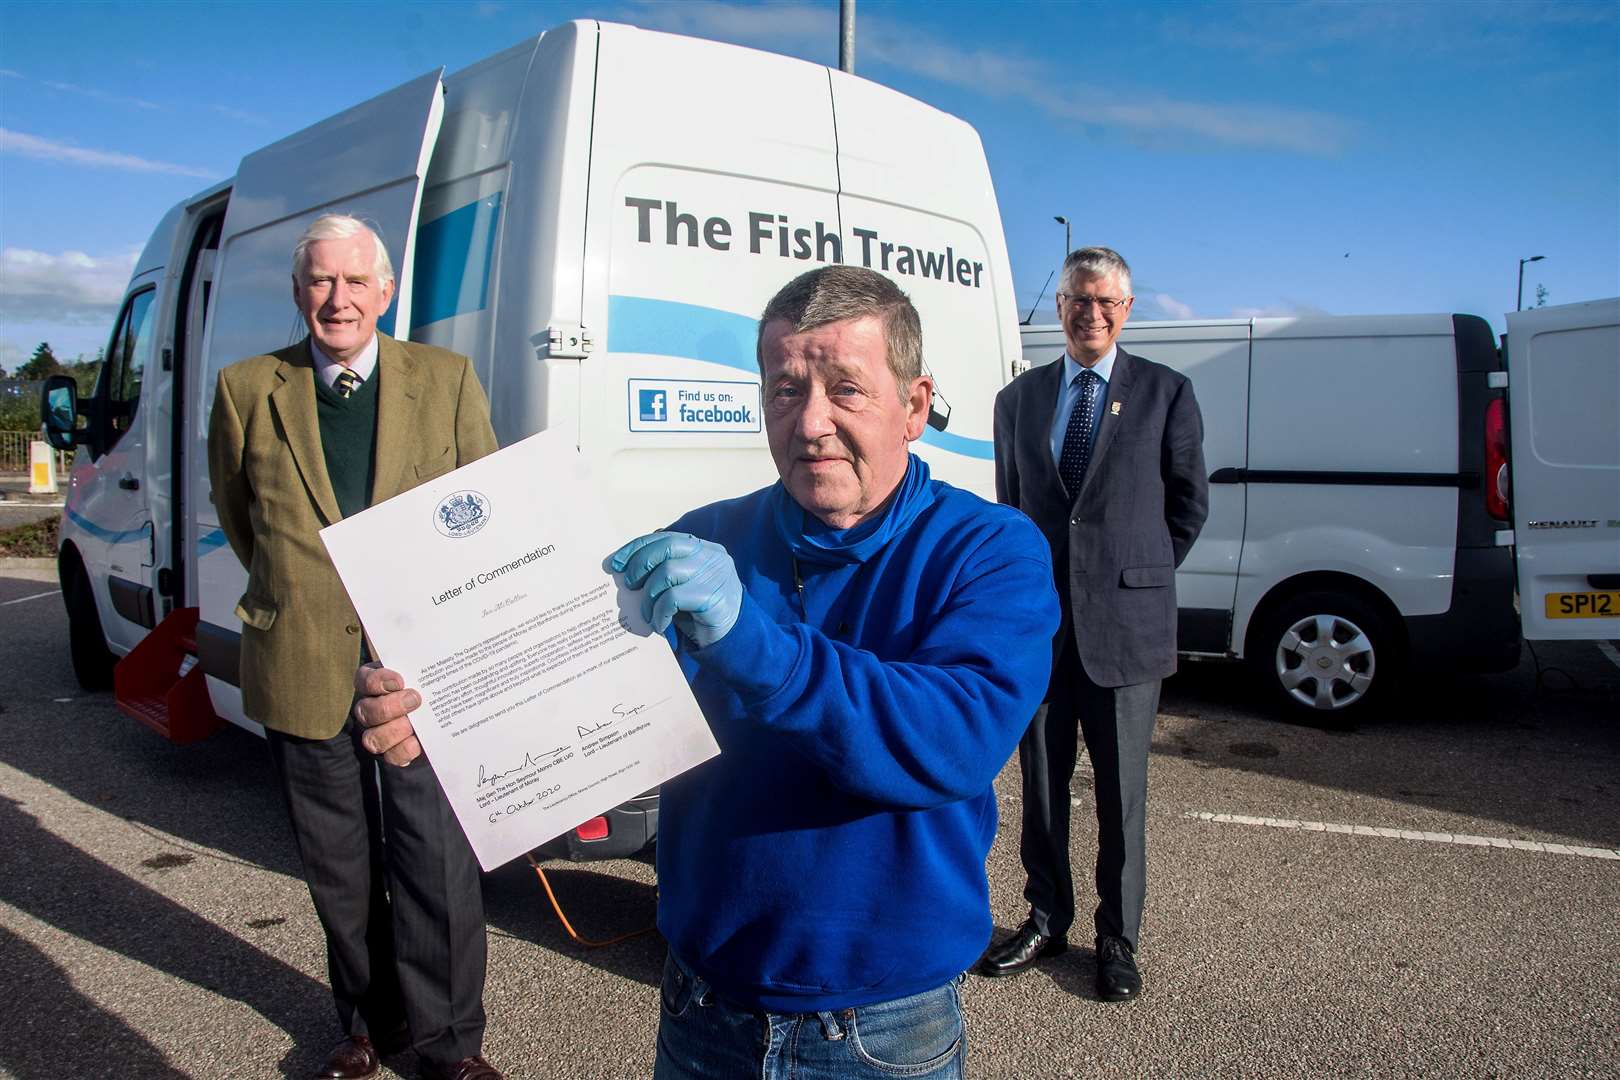 Ian McCallion proudly shows off his commendation, joined by Seymour Monro (back left) and Andrew Simpson, the Lord-Lieutenants of Moray and Banffshire respectively. Picture: Becky Saunderson